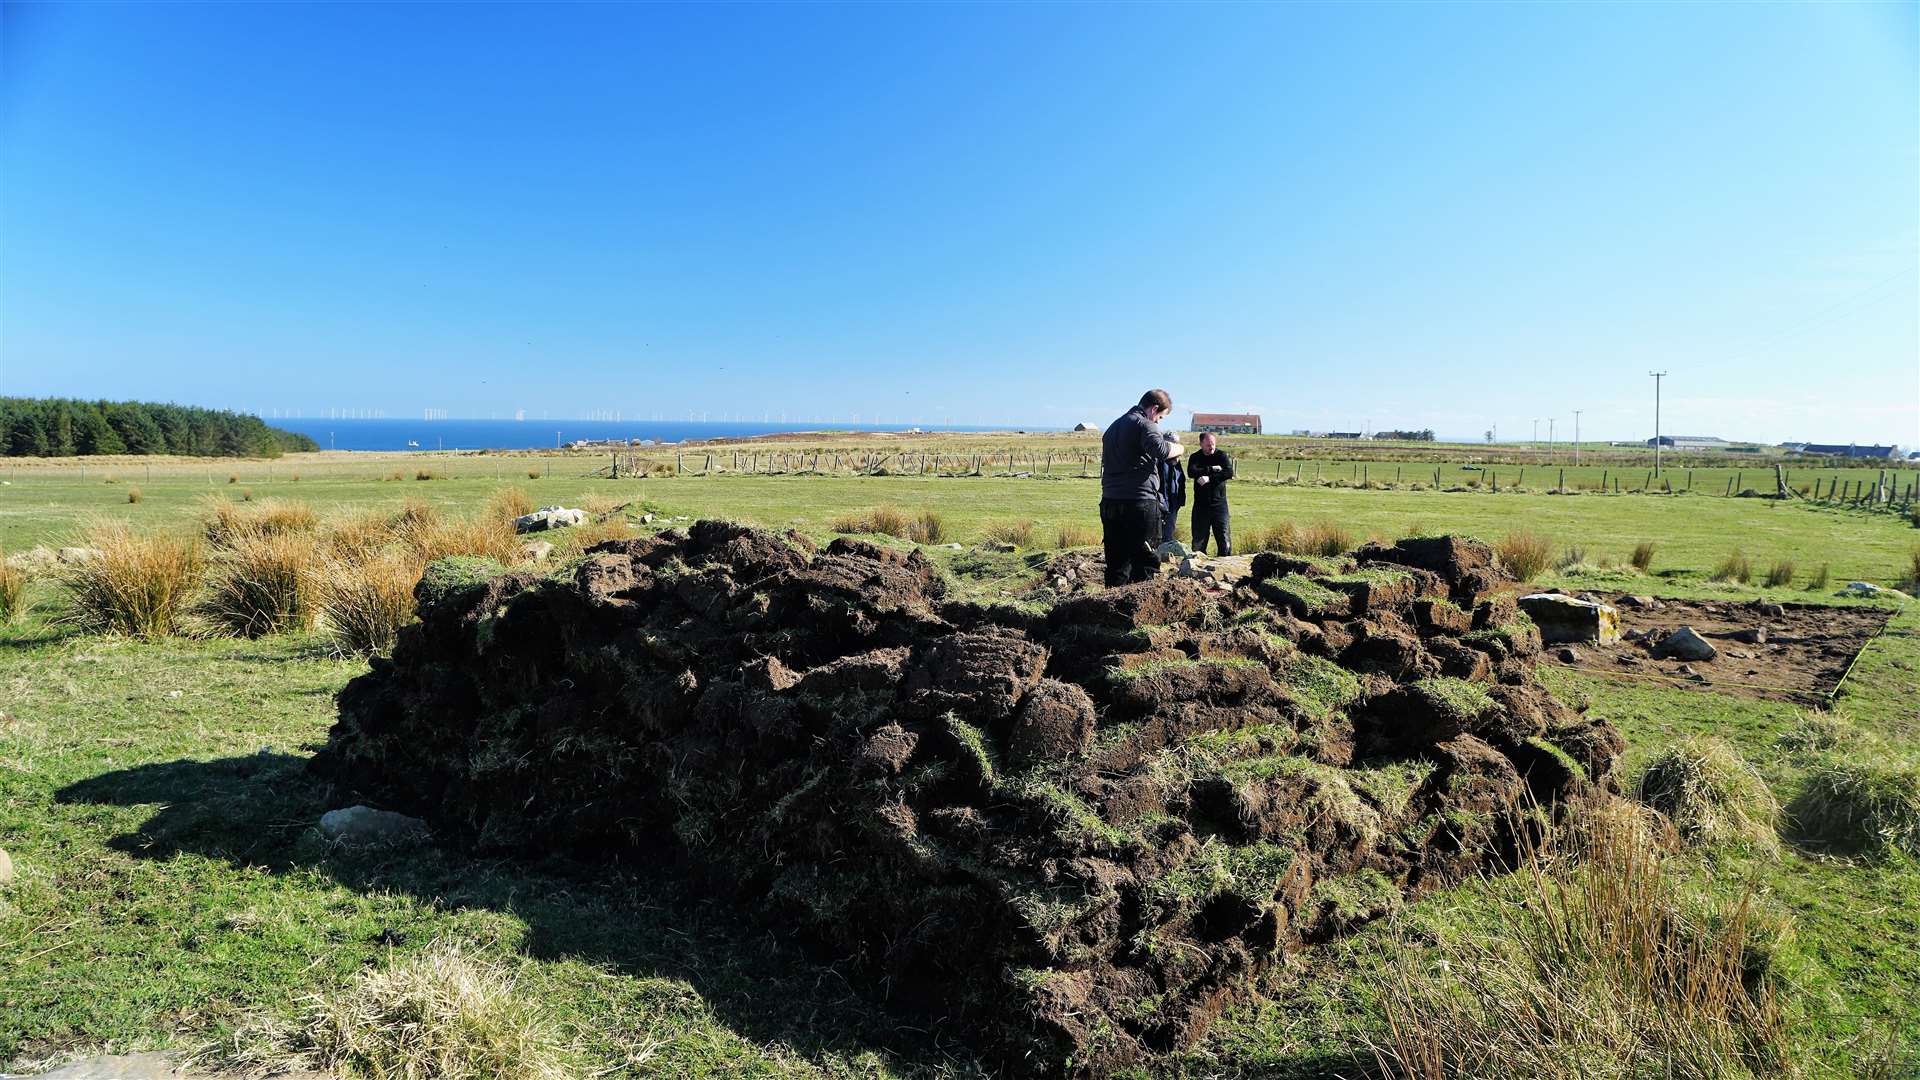 The turf from the area the team are inspecting was removed and stacked neatly. Picture: DGS